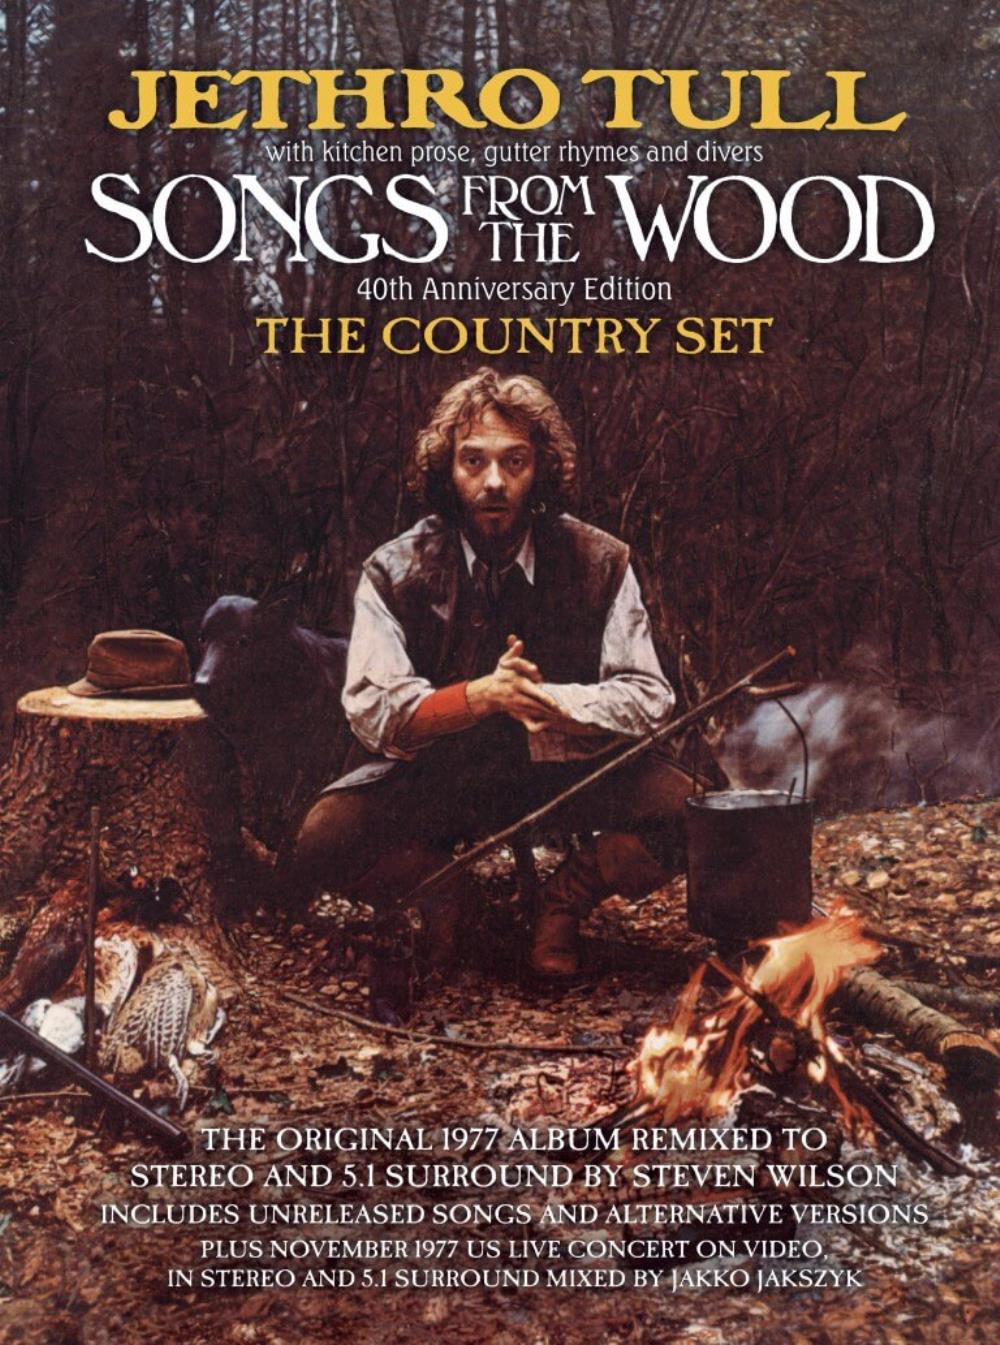 Jethro Tull Songs From The Wood - 40th Anniversary Edition - The Country Set album cover